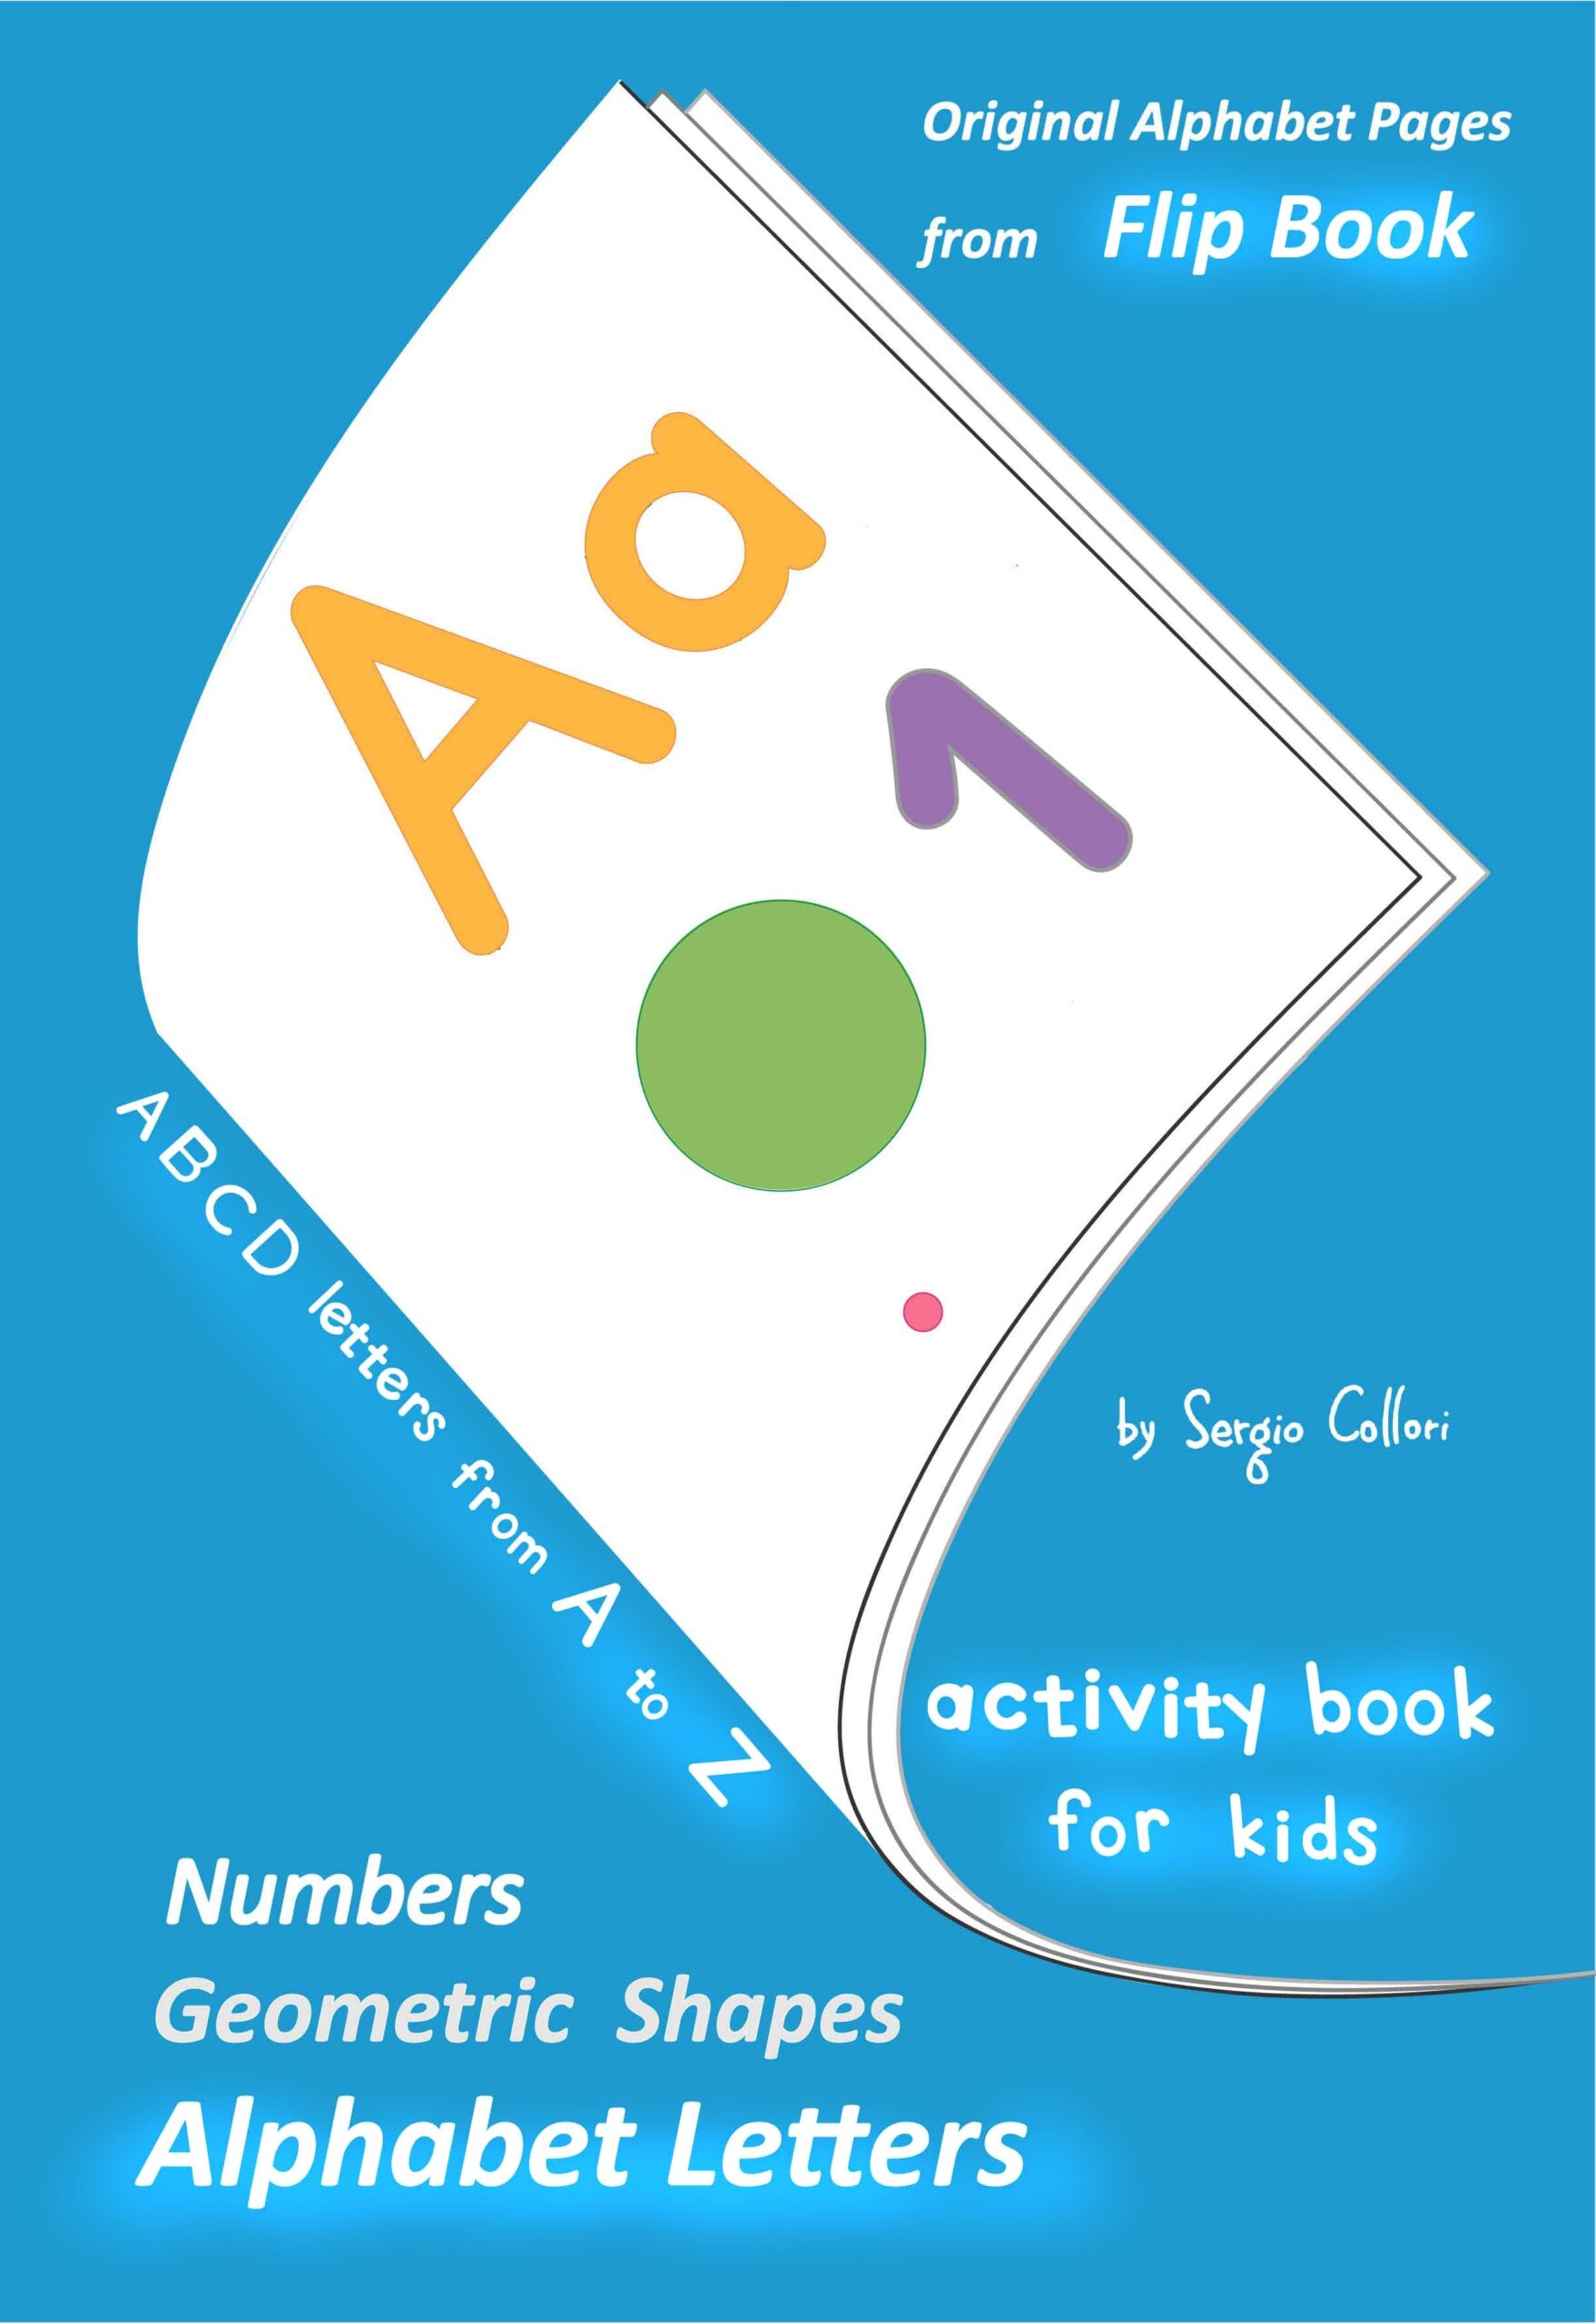 FREE: Alphabet Letters – Original Alphabet Pages from Flip Book: English Alphabet Letters with Numbers, ABCD Letters from A to Z, Geometric Shapes – Activity Books for Kids by Sergio Collori